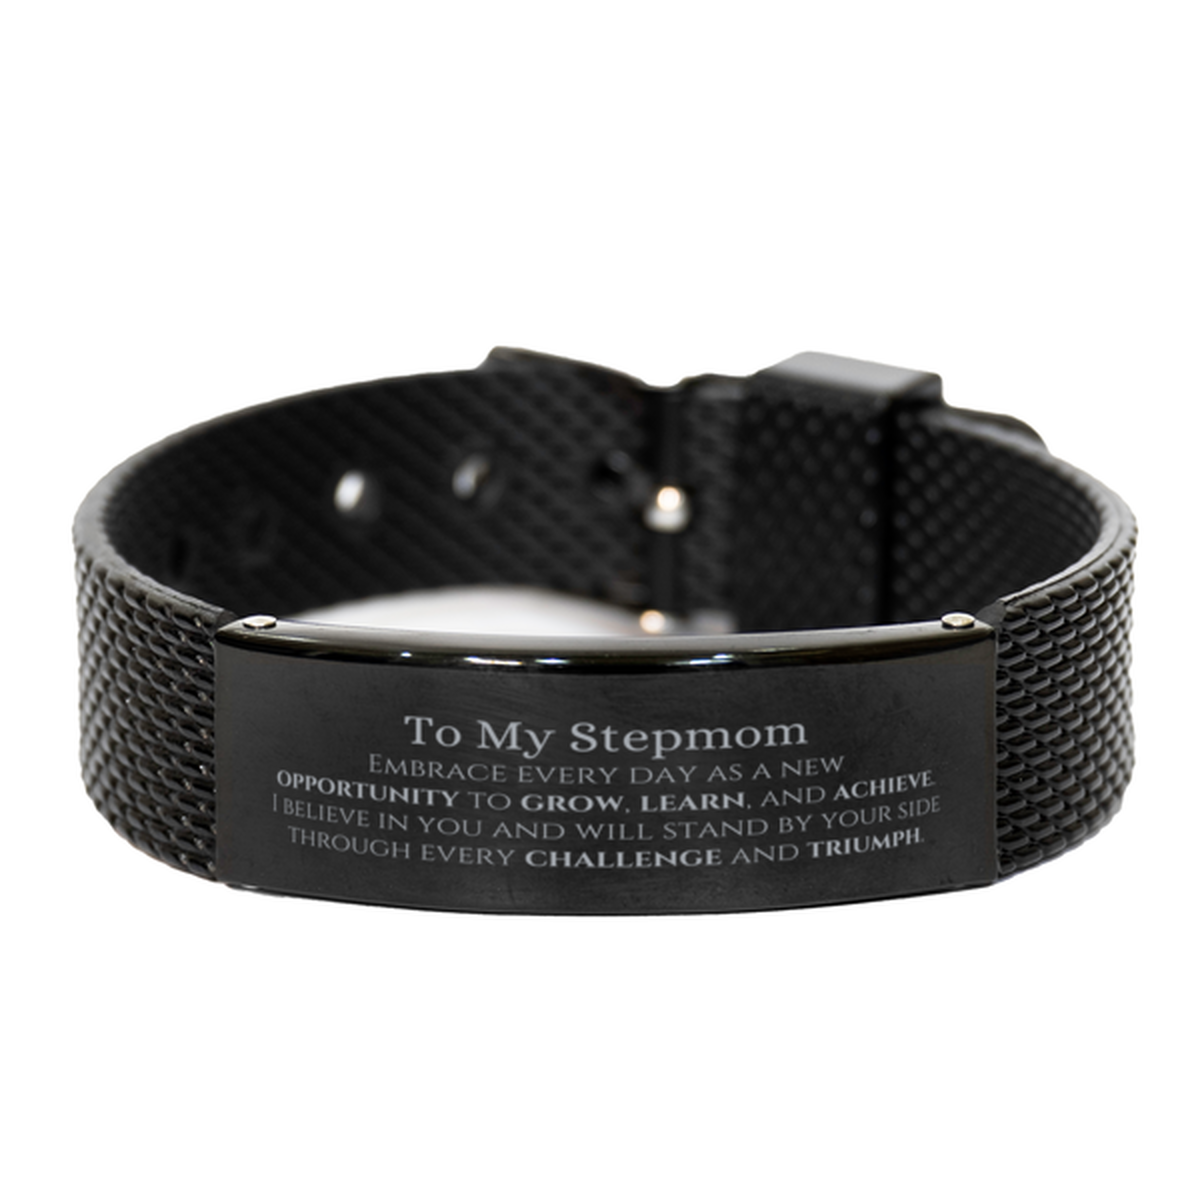 To My Stepmom Gifts, I believe in you and will stand by your side, Inspirational Black Shark Mesh Bracelet For Stepmom, Birthday Christmas Motivational Stepmom Gifts